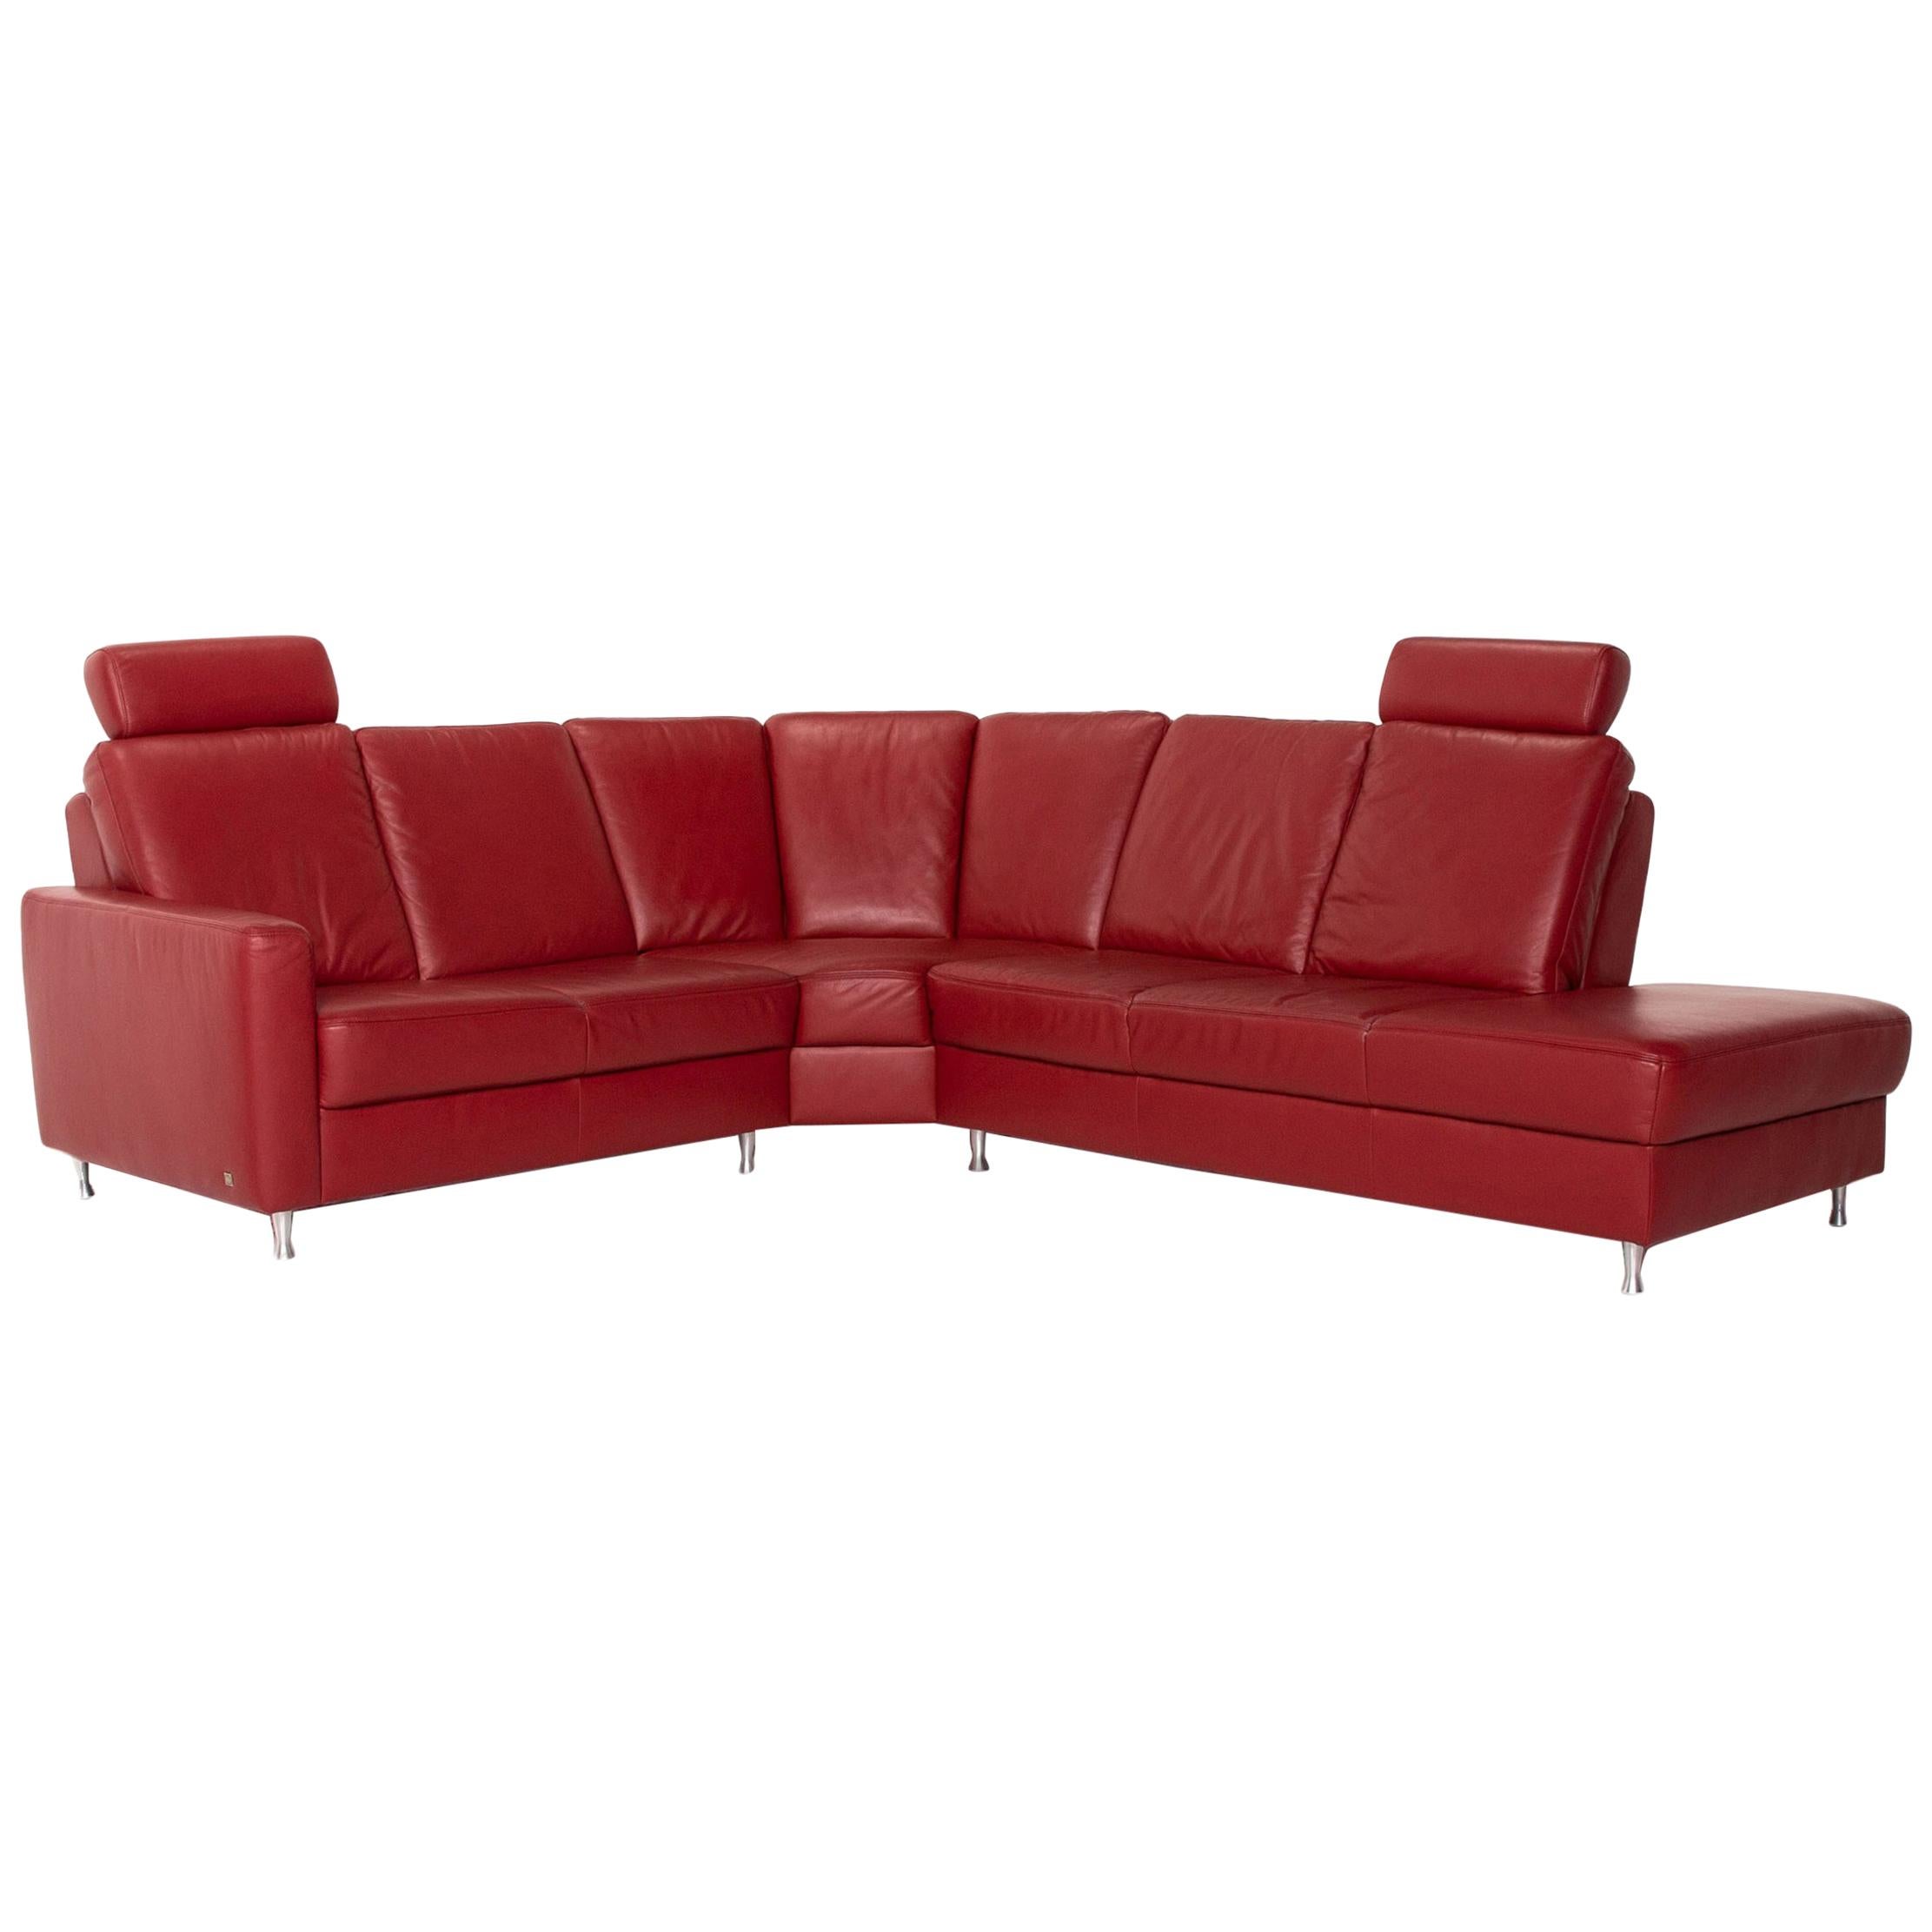 Sample Ring Leather Corner Sofa Red Dark Red Sofa Function Couch For Sale